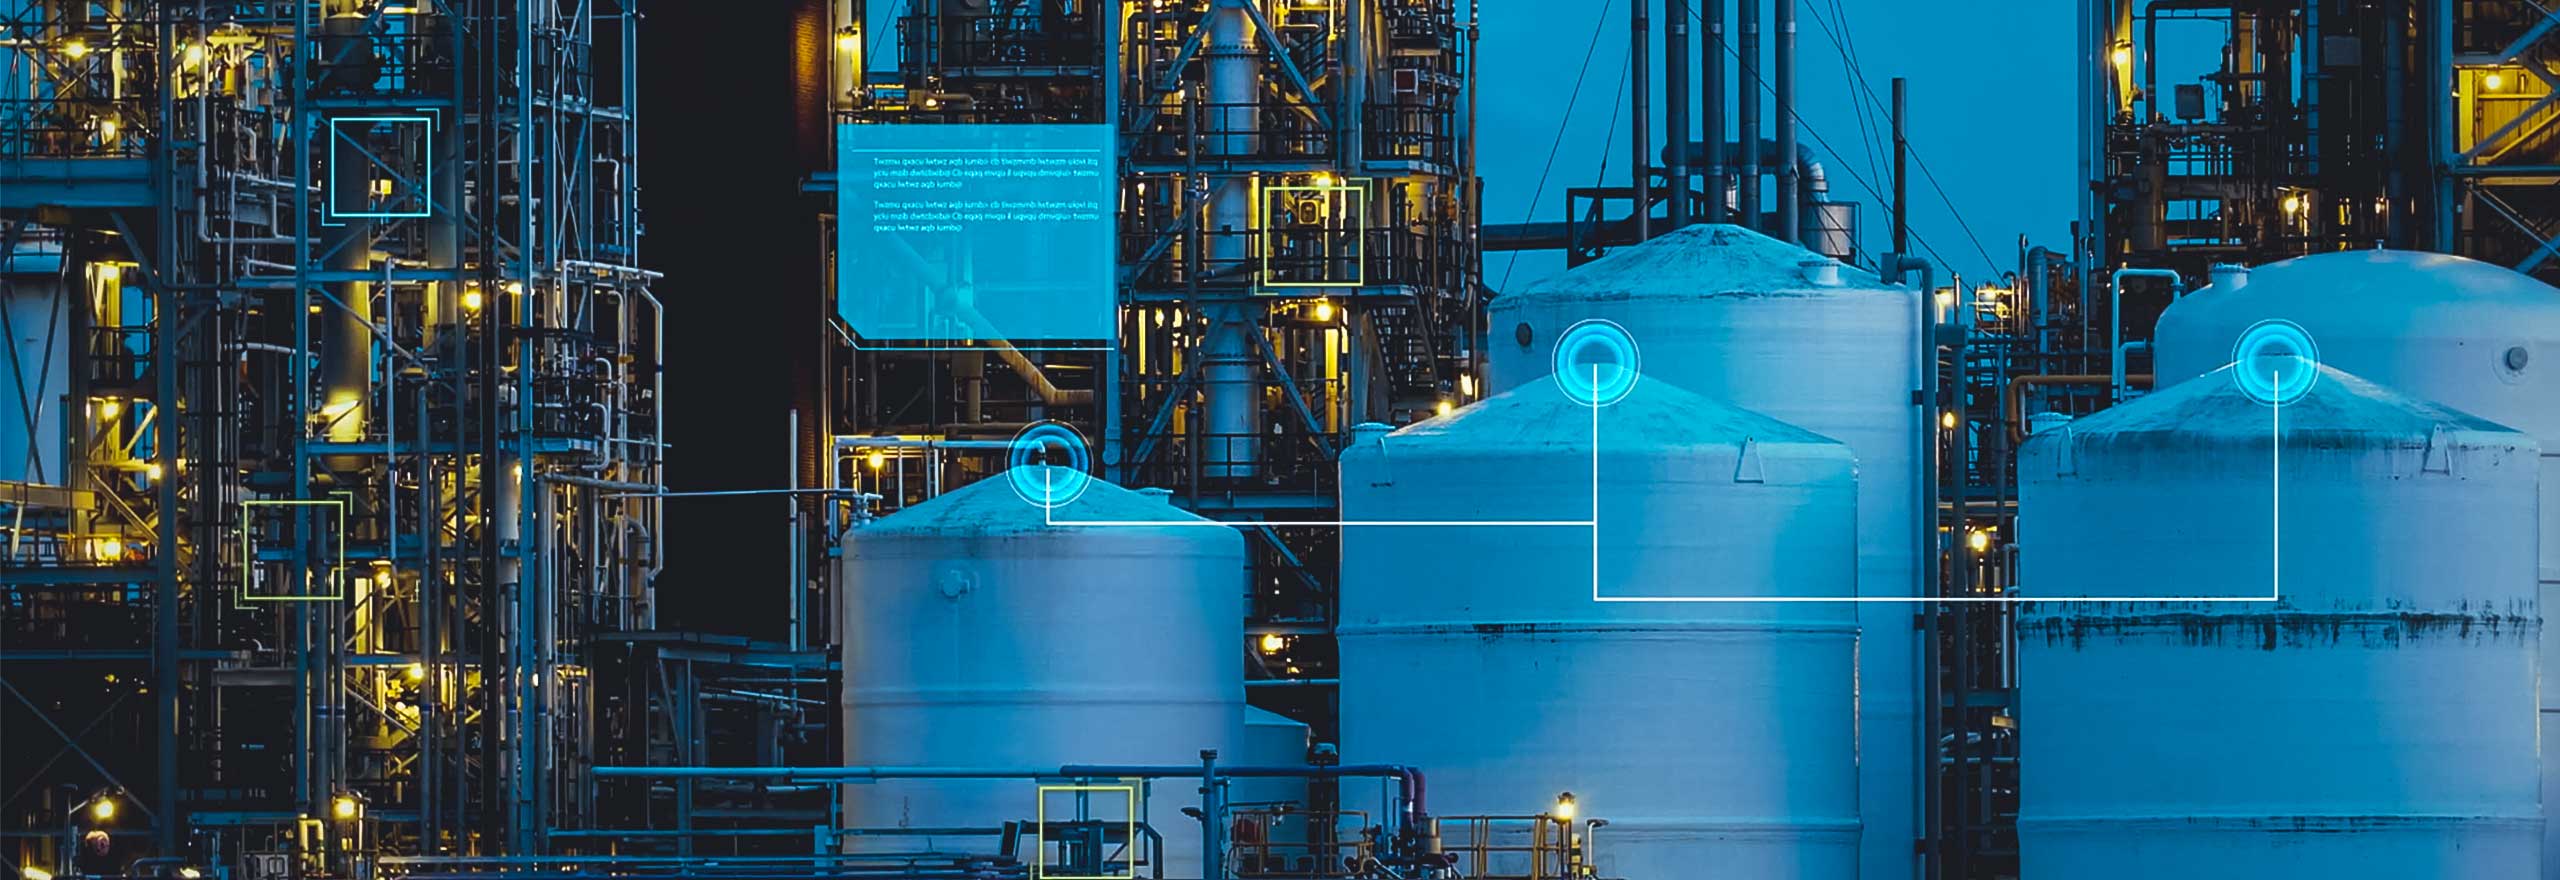  An industrial facility at night. The image is overlayed with digital elements that represent operations data